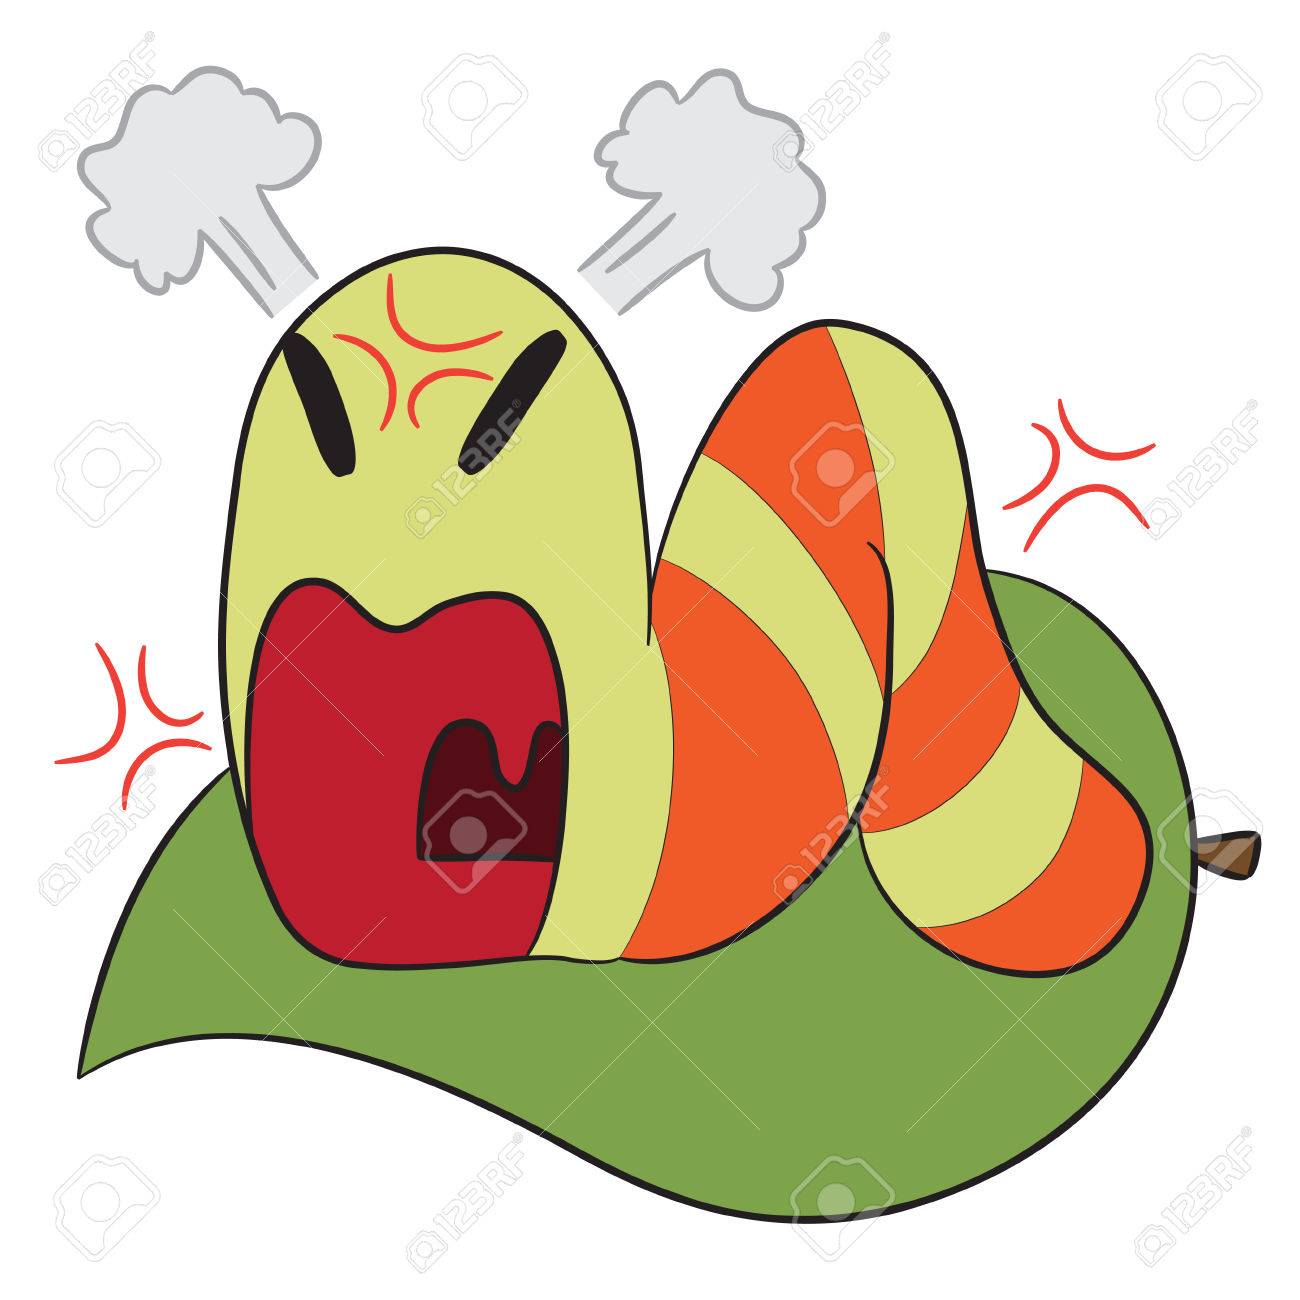 worm clipart angry